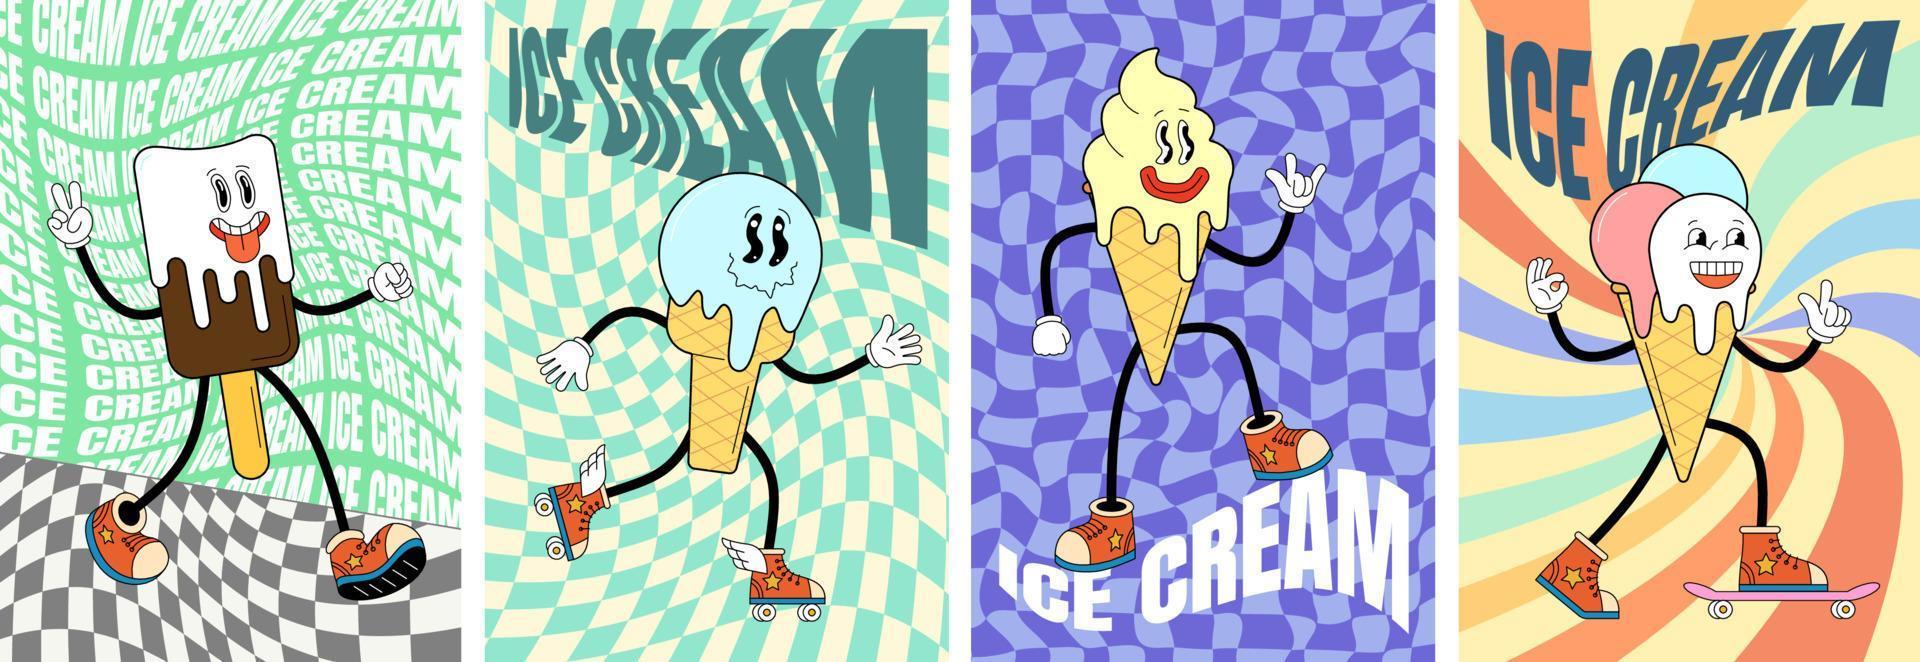 Chill vintage ice cream cone characters on funky artwork print. Trippy sweet treat mascots on poster set. Groovy hippie style dessert on vibrant multicolor backdrops. Stylish millennium vector banners